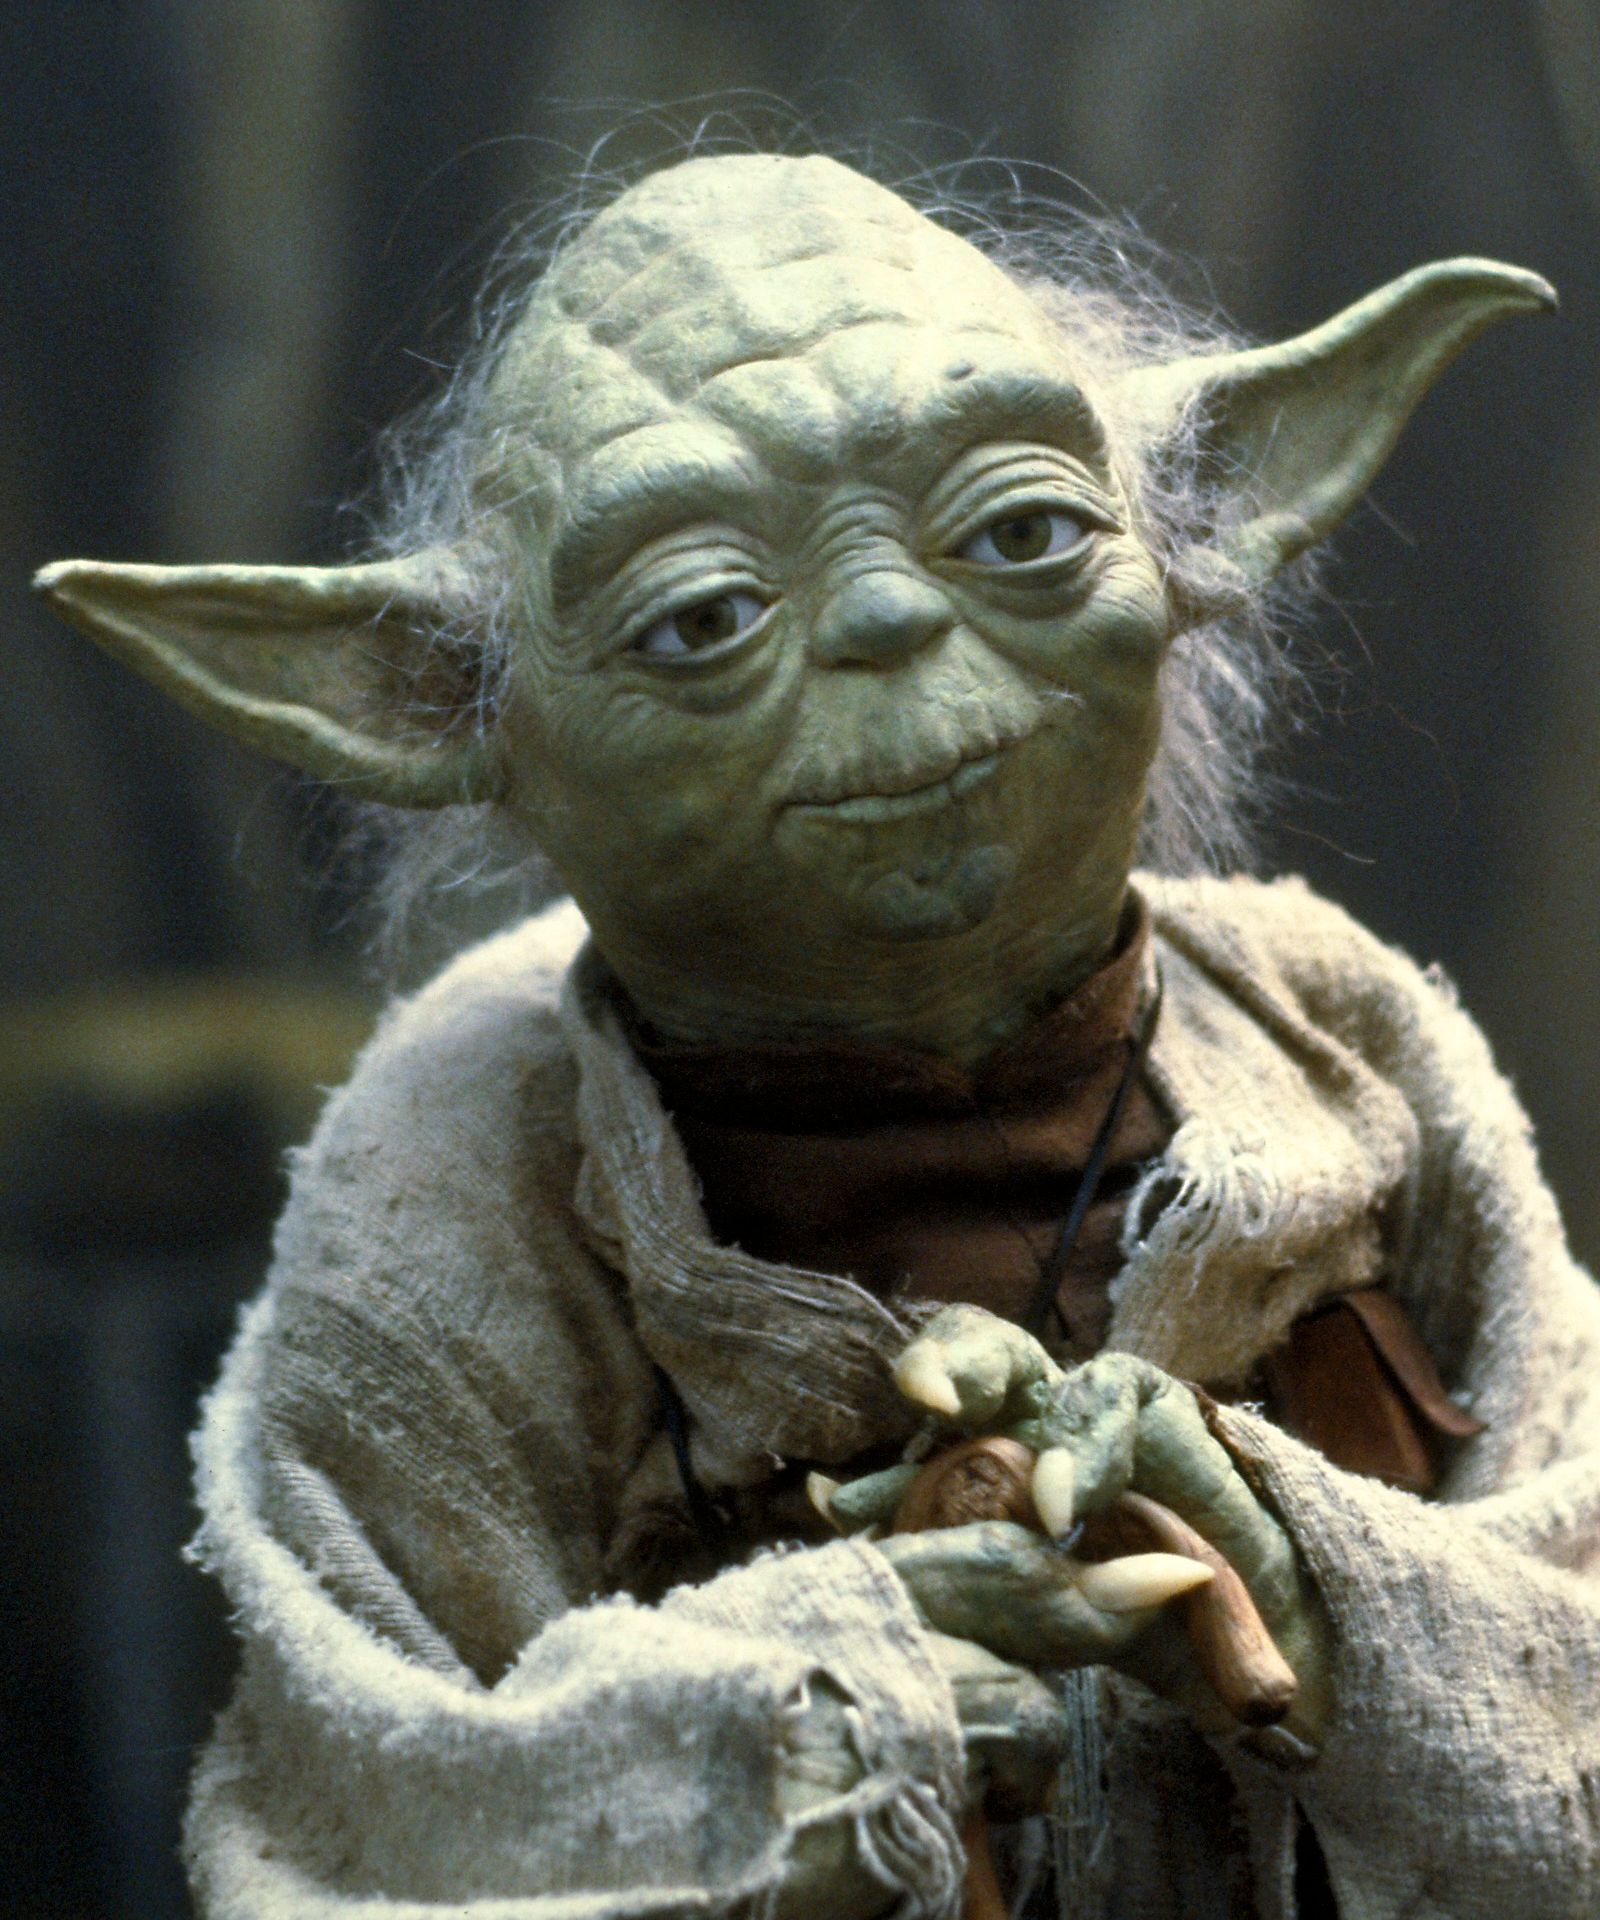 How old is Yoda?